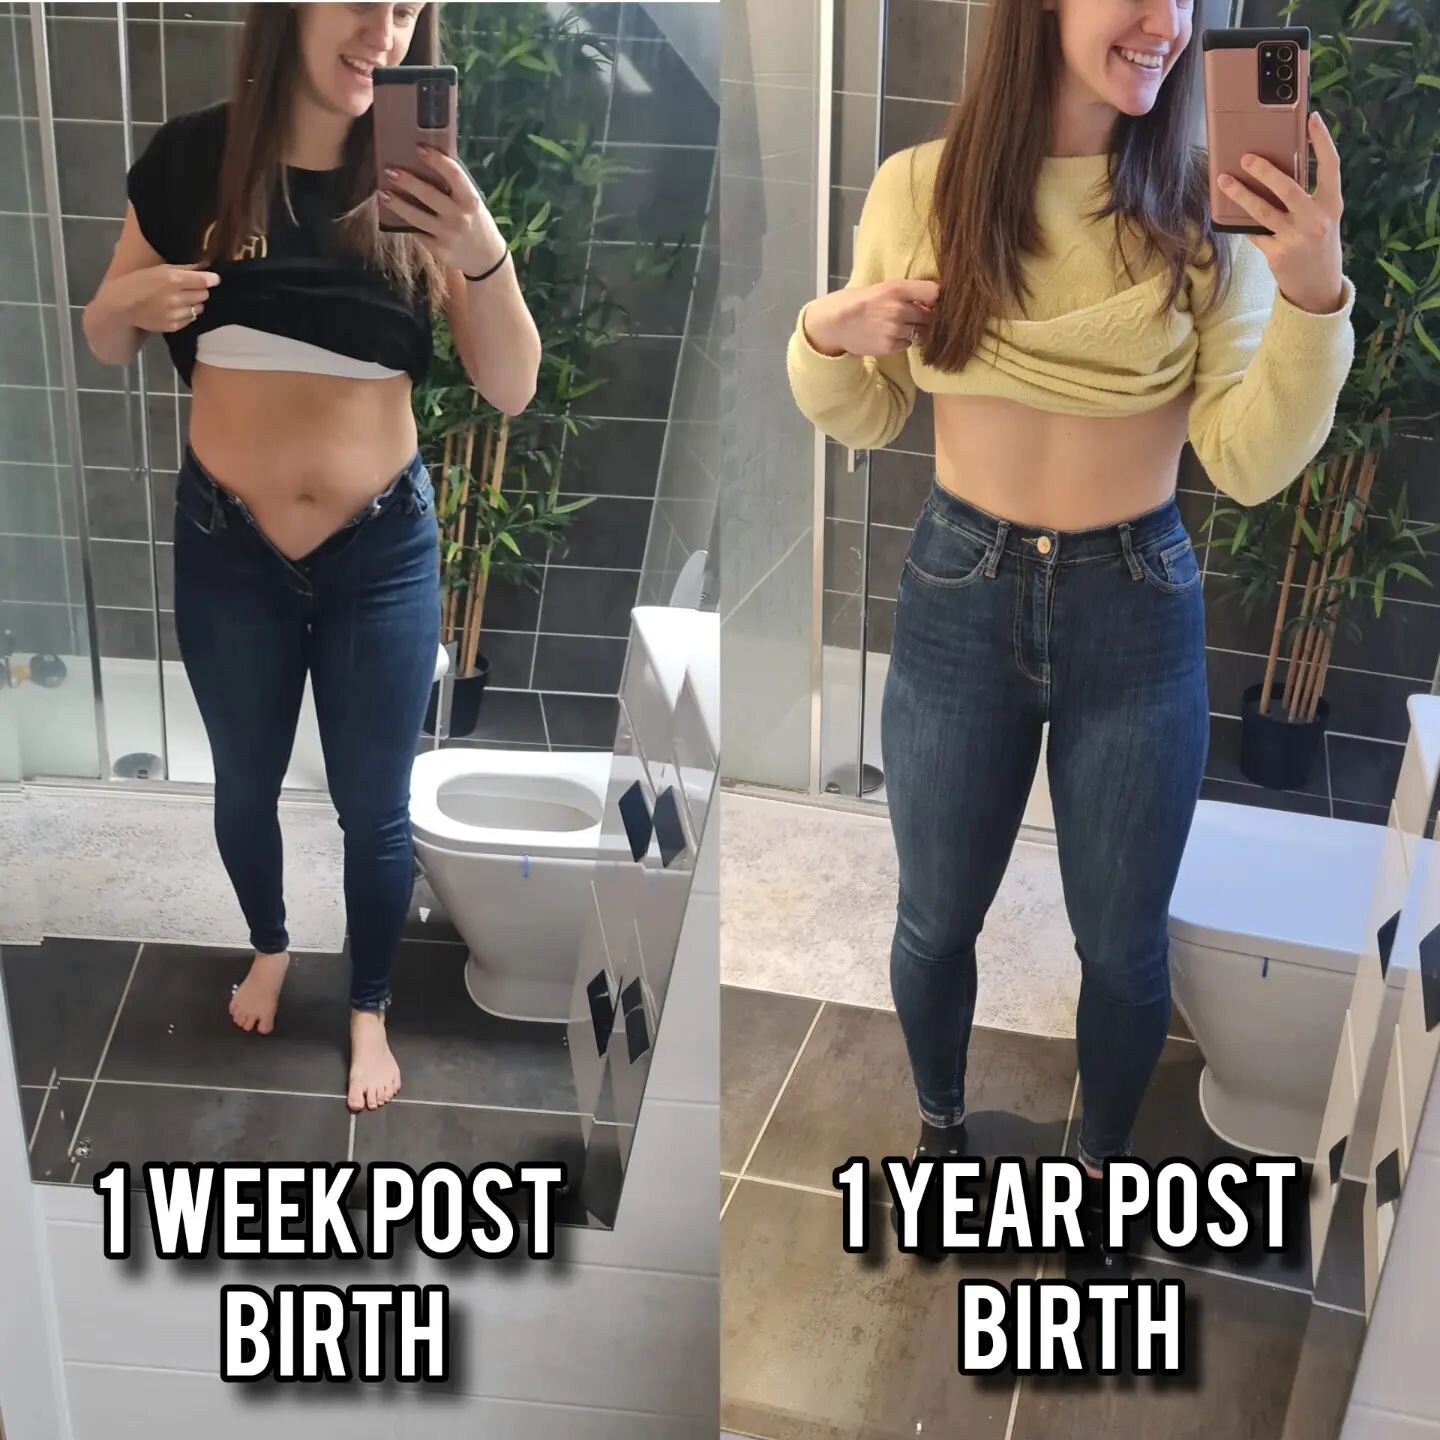 Reflecting on my postpartum journey, I couldn't fathom squeezing into these jeans just a week after giving birth. The doubt lingered &ndash; would I ever fit into my old clothes again? Fast forward a year, and here we are! No crazy fitness plans, no 